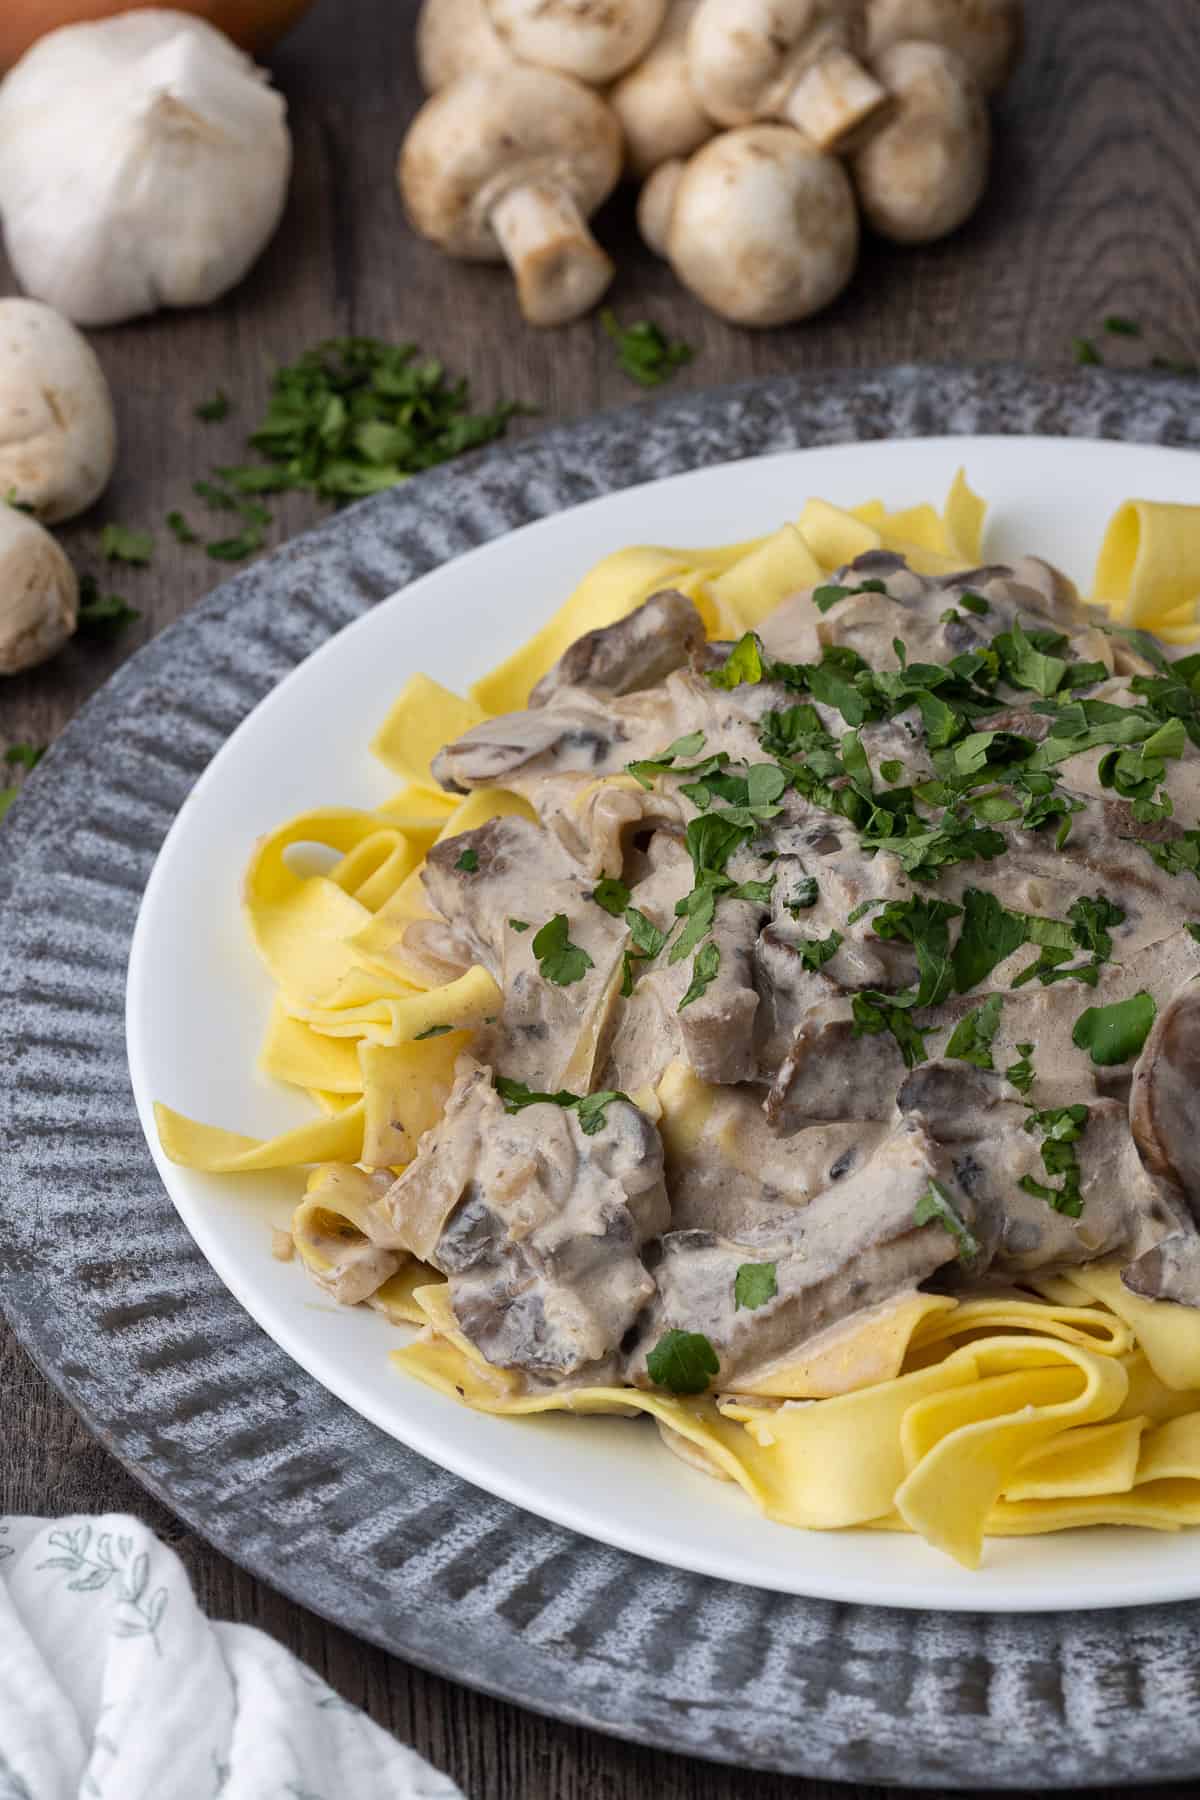 beef stroganoff with mushrooms and gravy over noodles.